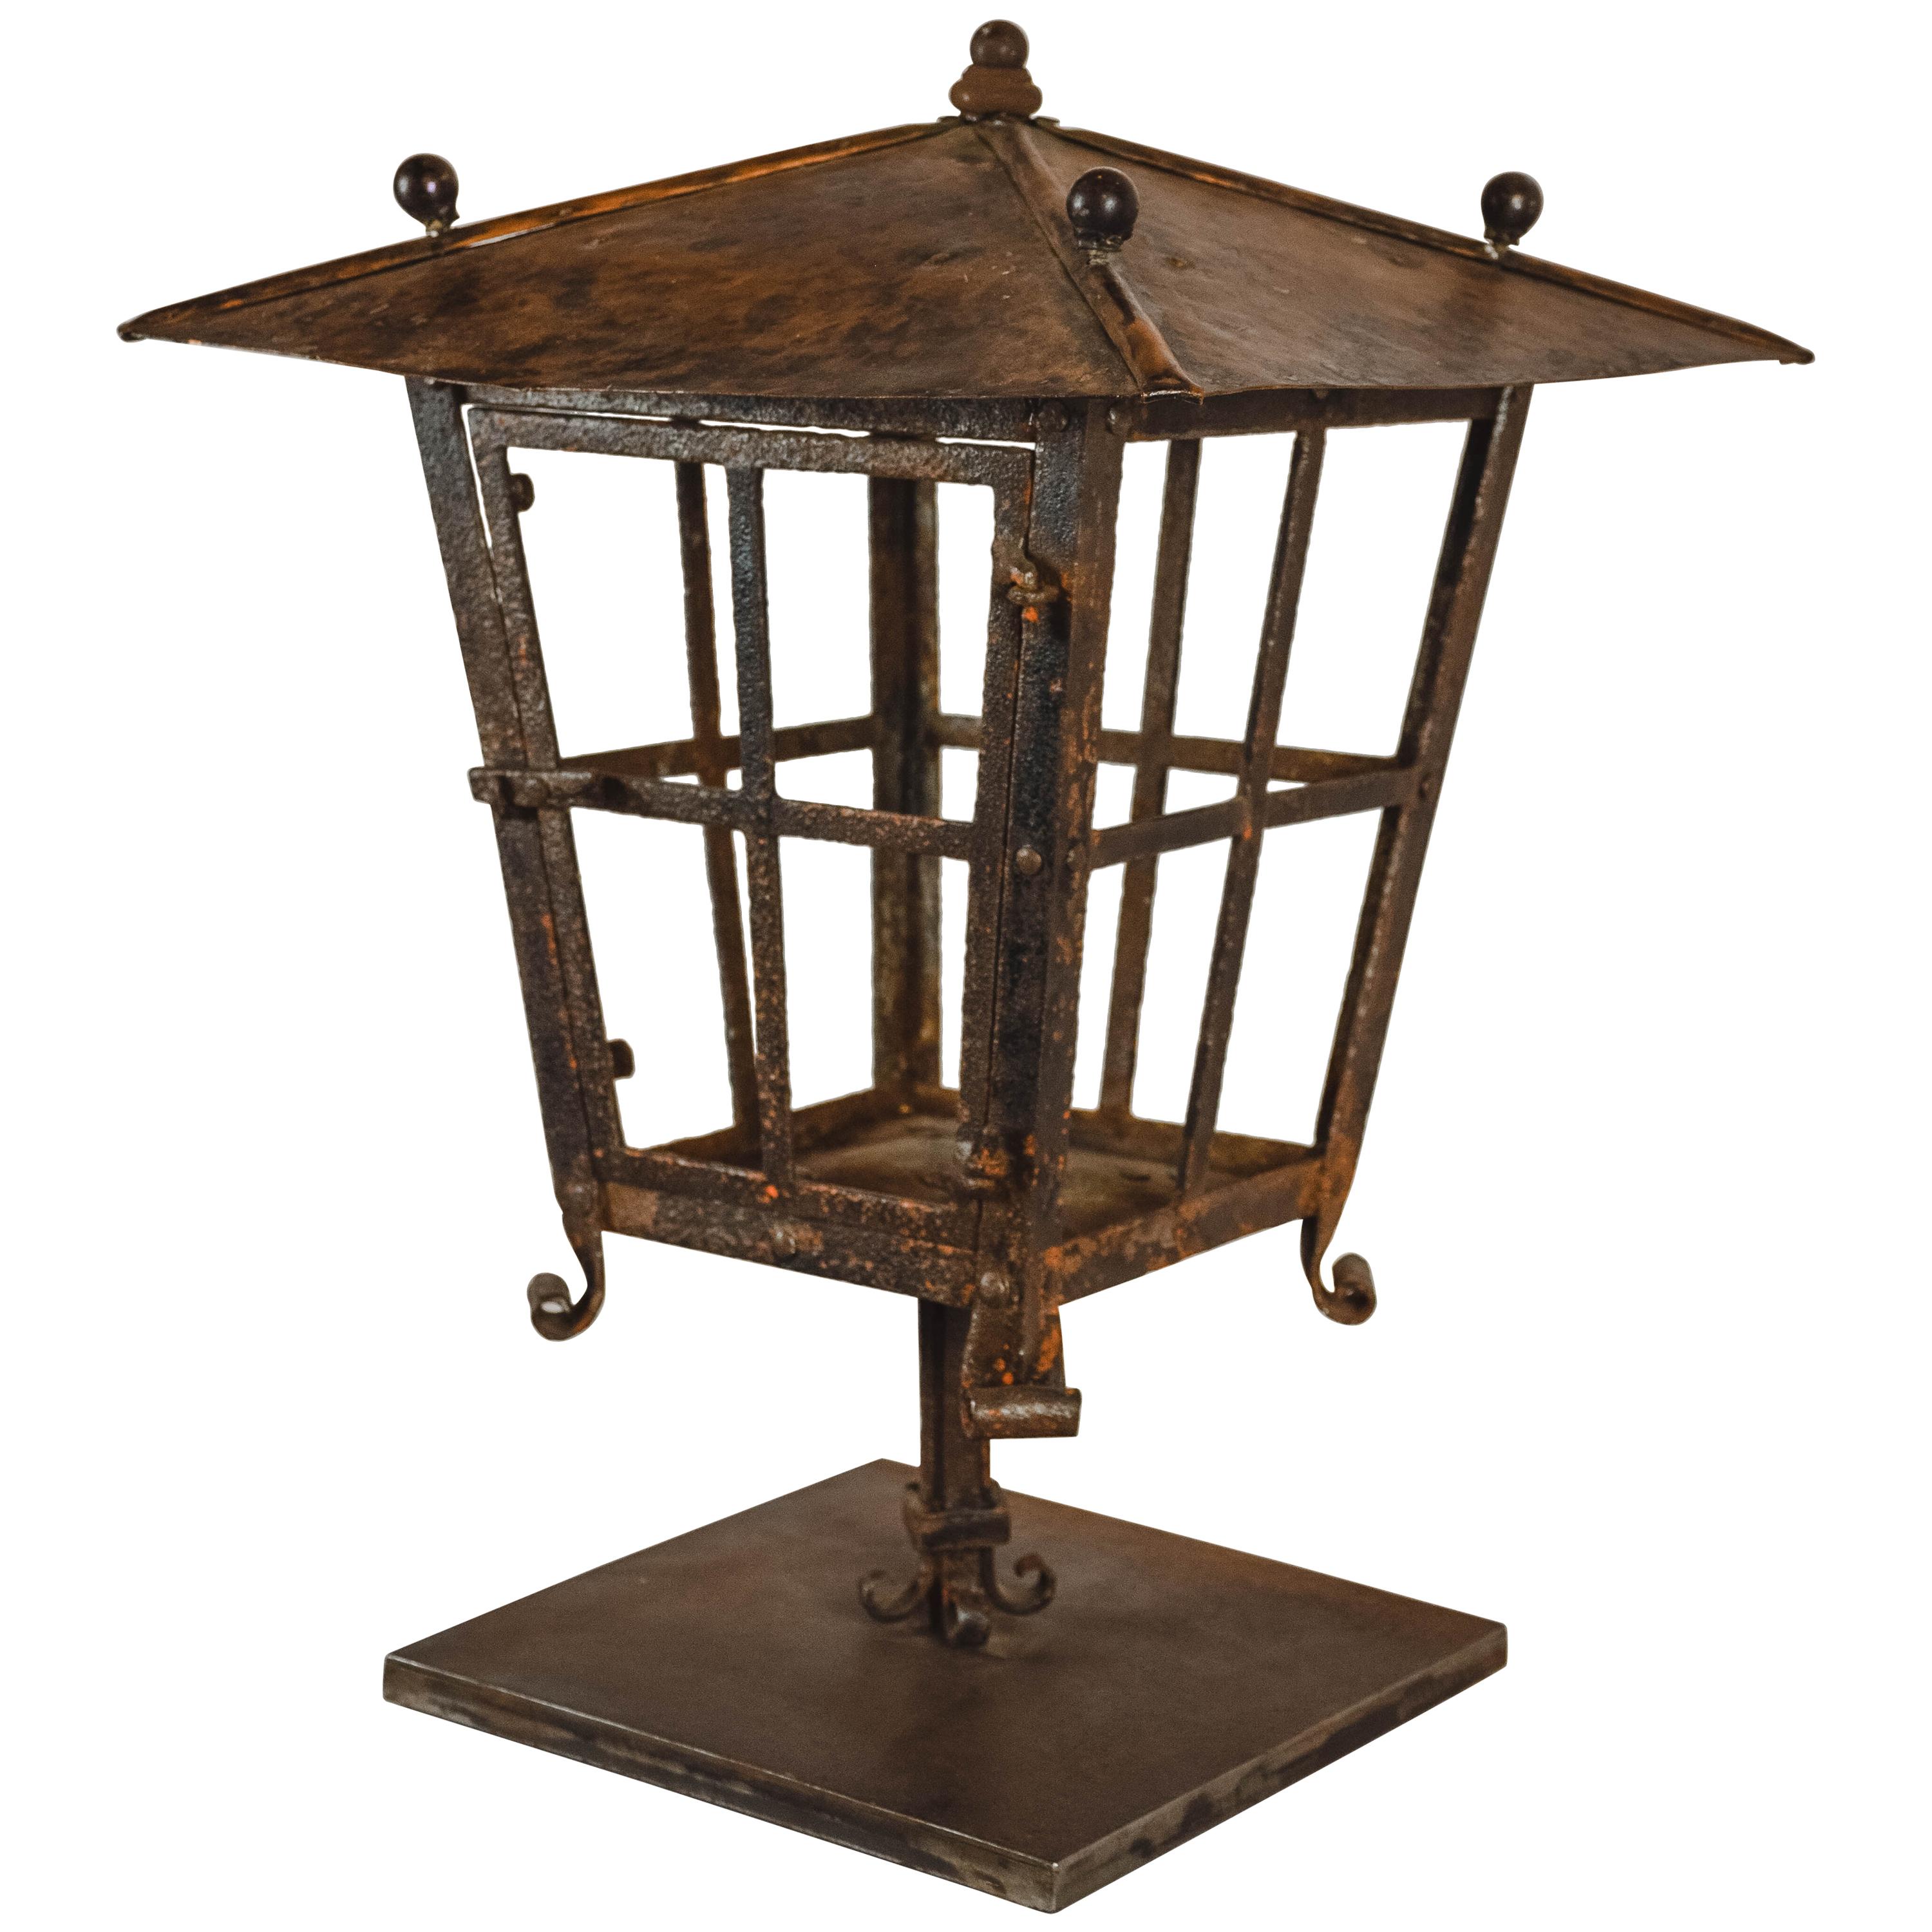 French Copper and Iron Lantern